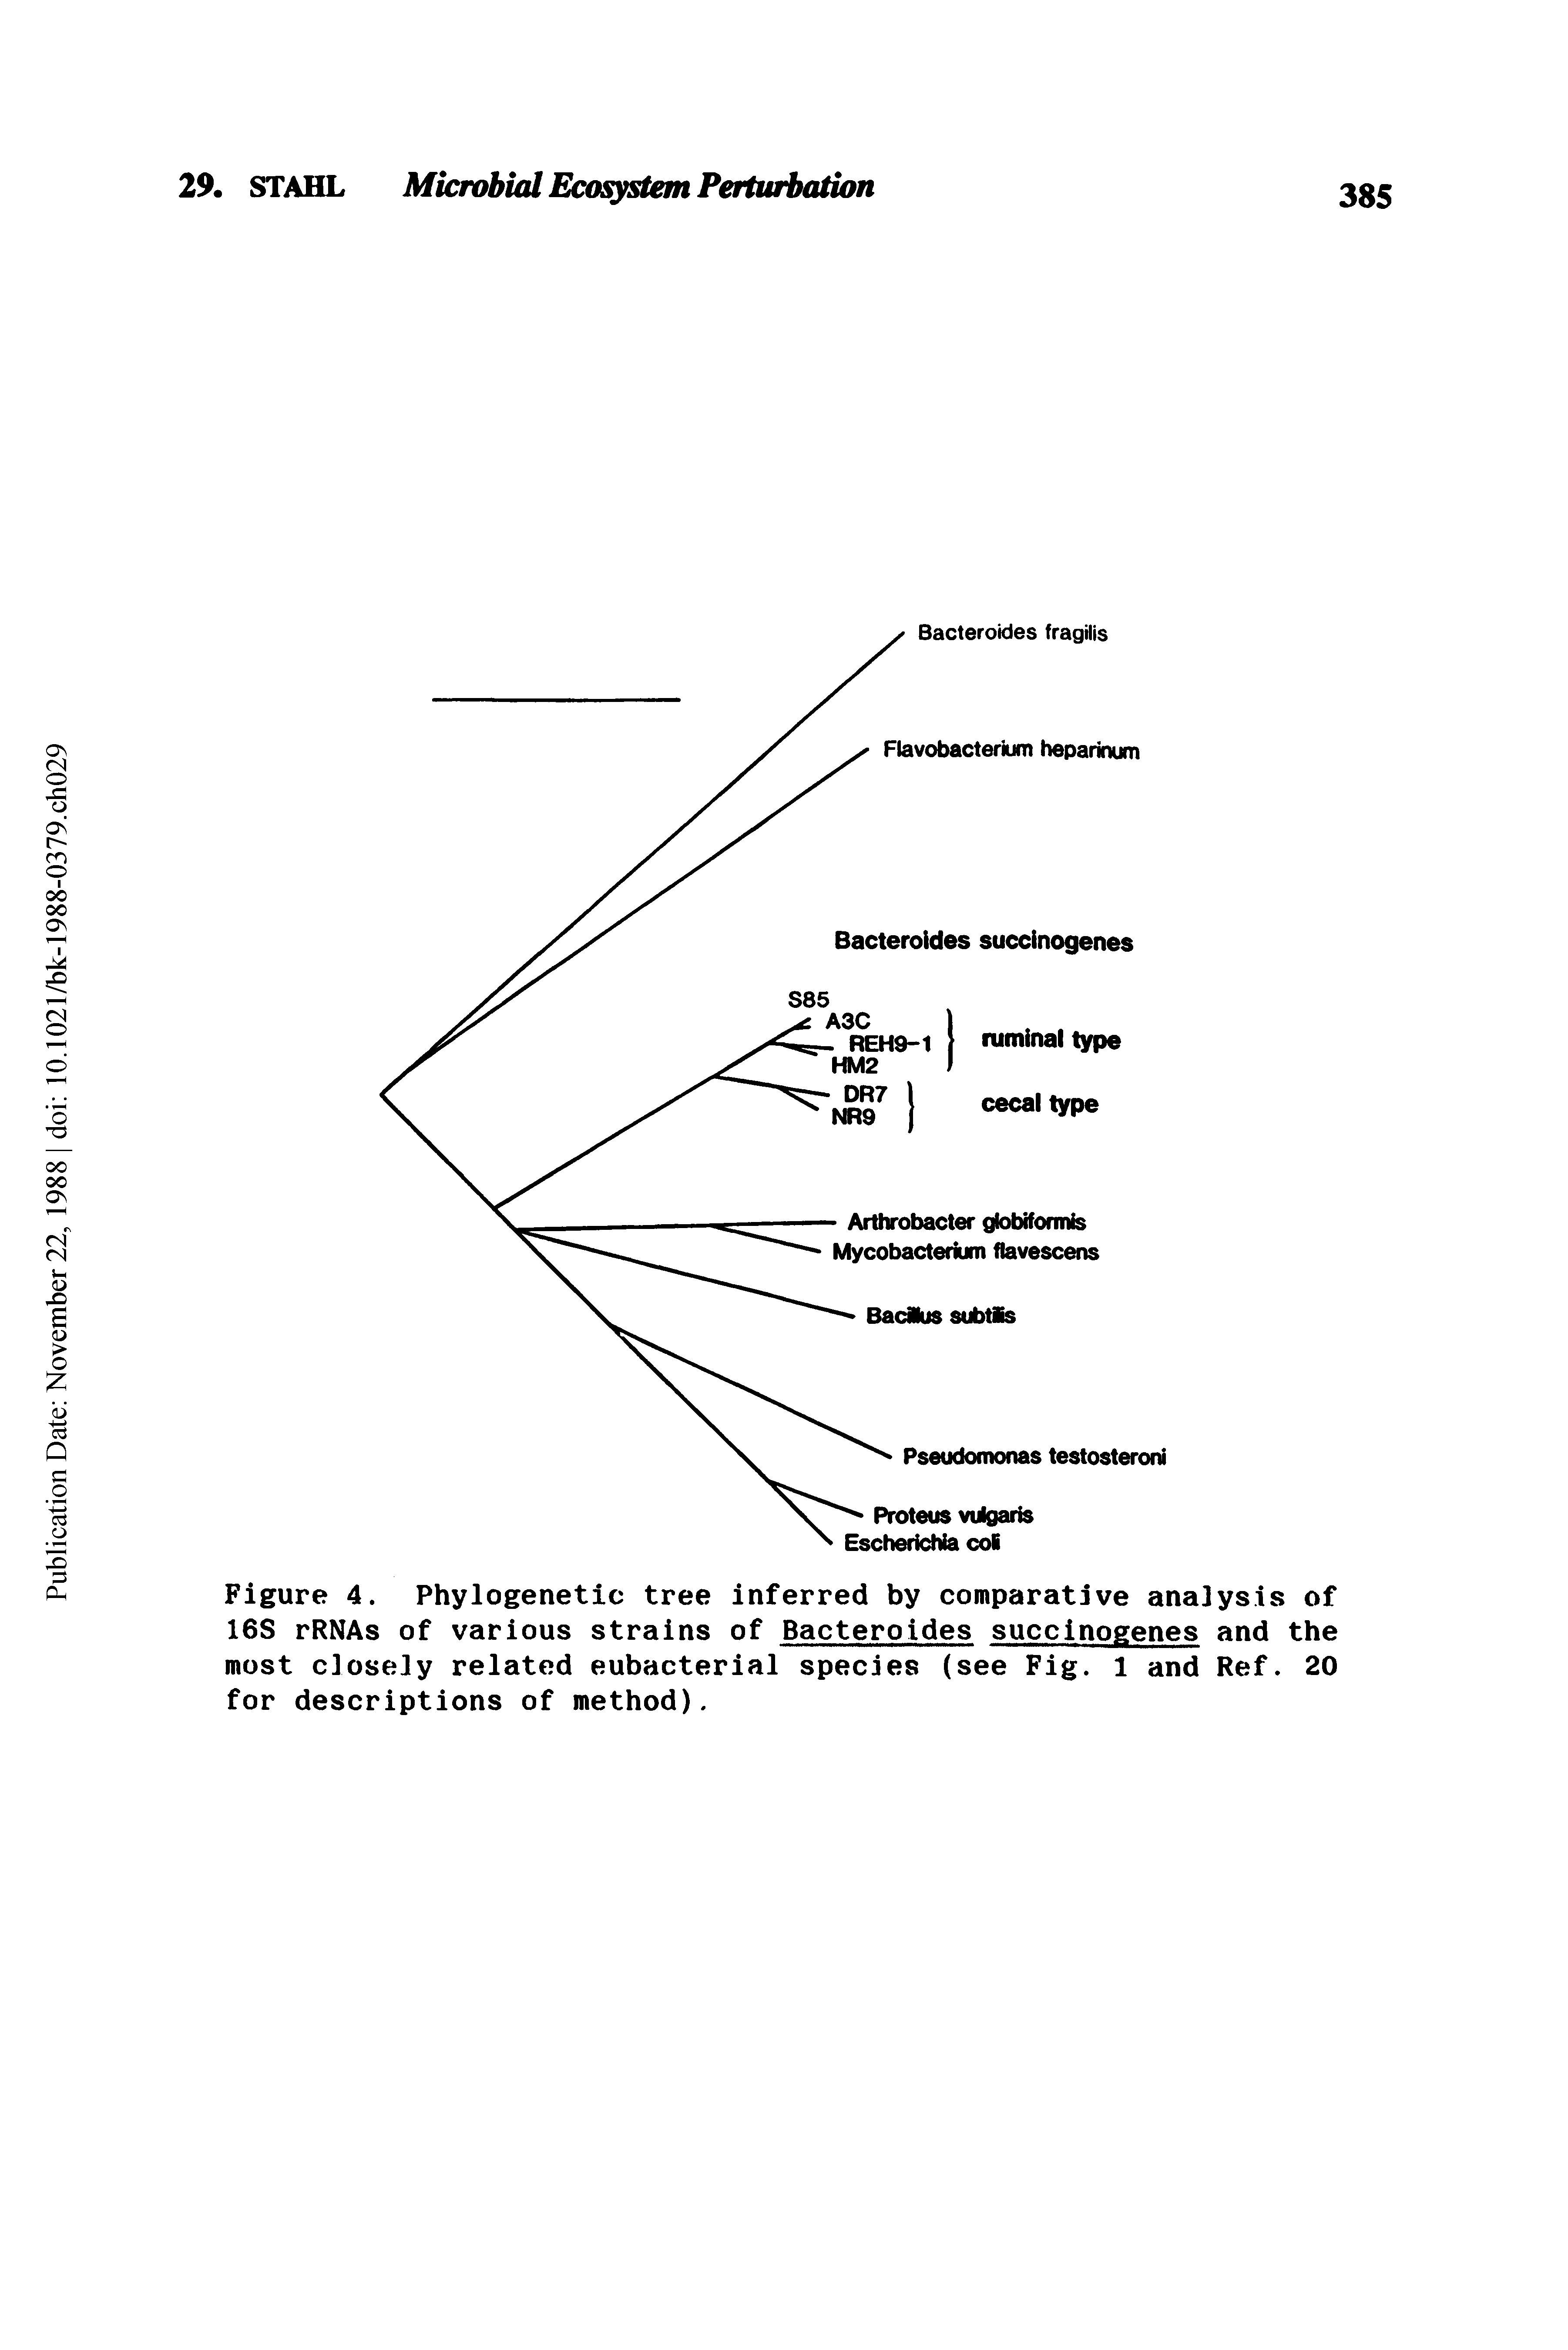 Figure 4. Phylogenetic tree inferred by comparative analysis of 16S rRNAs of various strains of Bacteroides succinogenes and the most closely related eubacterial species (see Fig. 1 and Ref. 20 for descriptions of method).